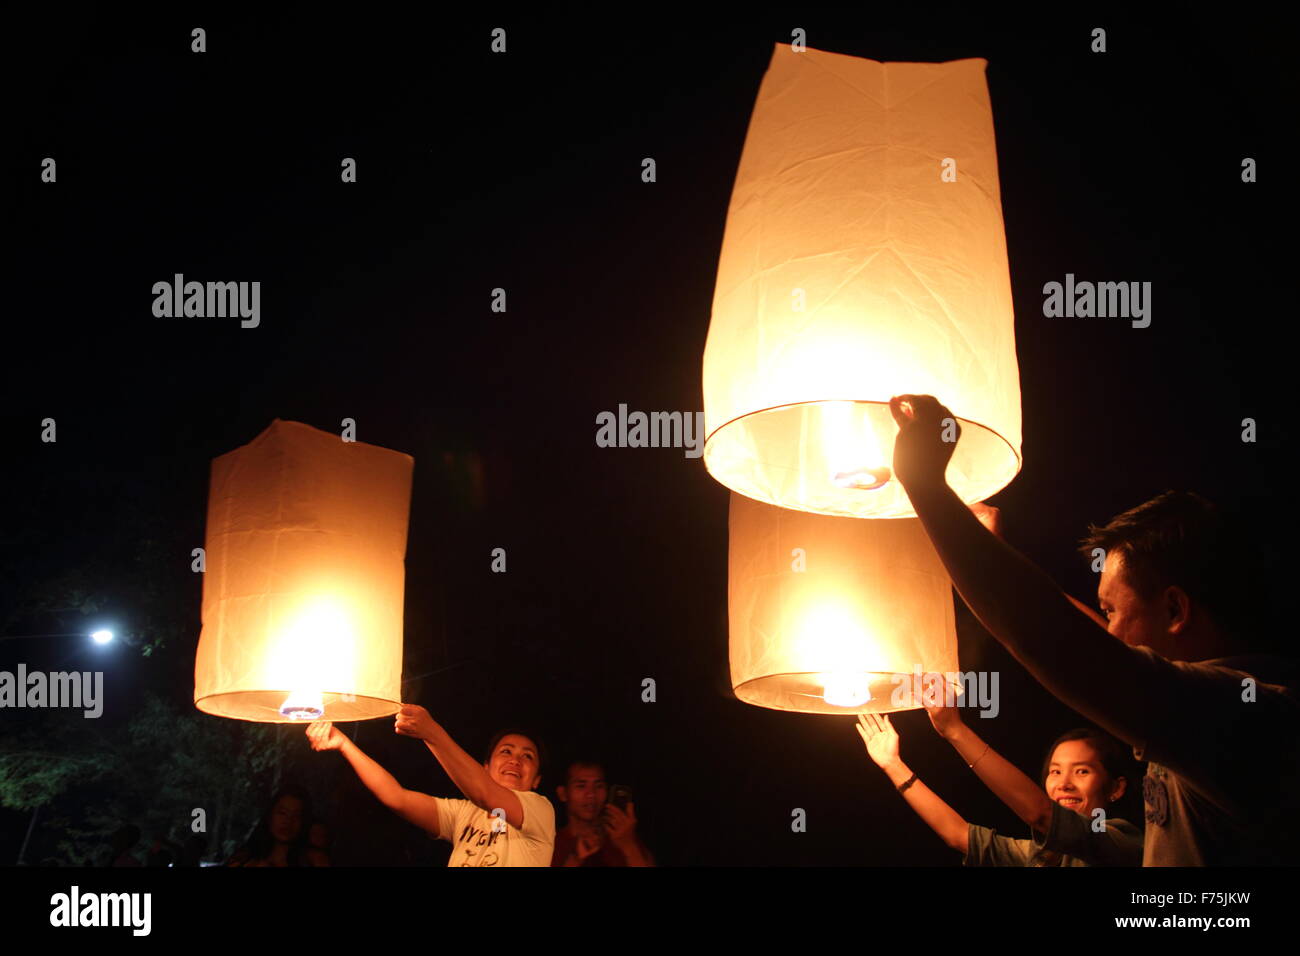 Chiang Mai, Thailand. 25th November 2015. Tourists gather to release Khom Loi (sky lantern) during the Yi Peng Festival outside the Lanna Dhutanka Temple in Chiang Mai. The Lanna Kathina Ceremony takes place around the Loy Krathong festival each year. Stock Photo